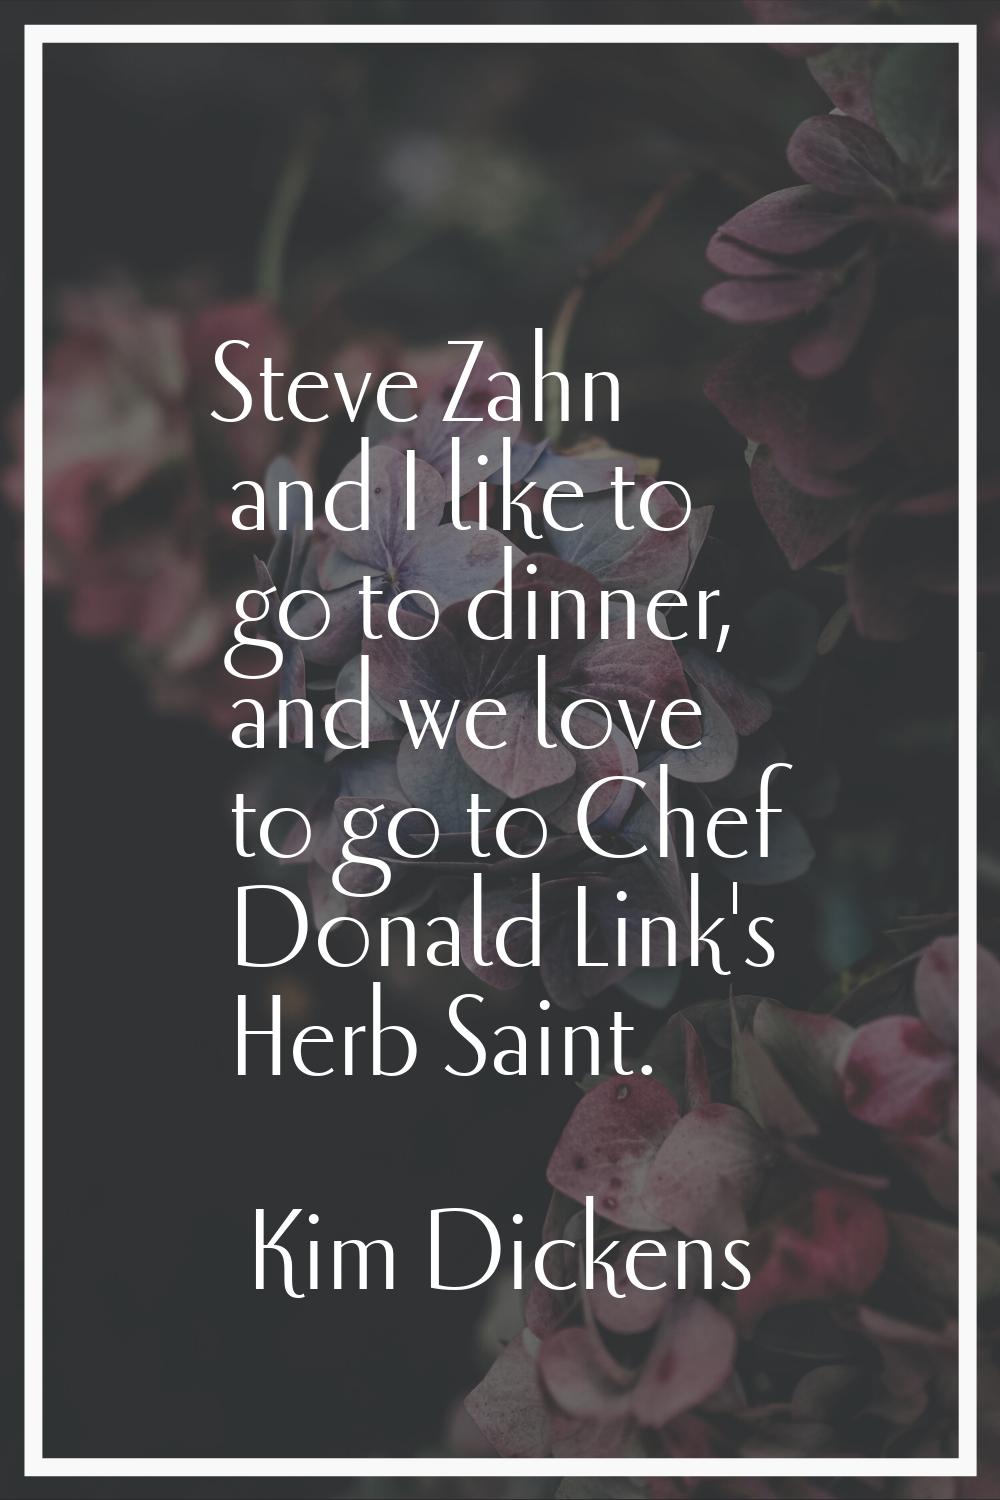 Steve Zahn and I like to go to dinner, and we love to go to Chef Donald Link's Herb Saint.